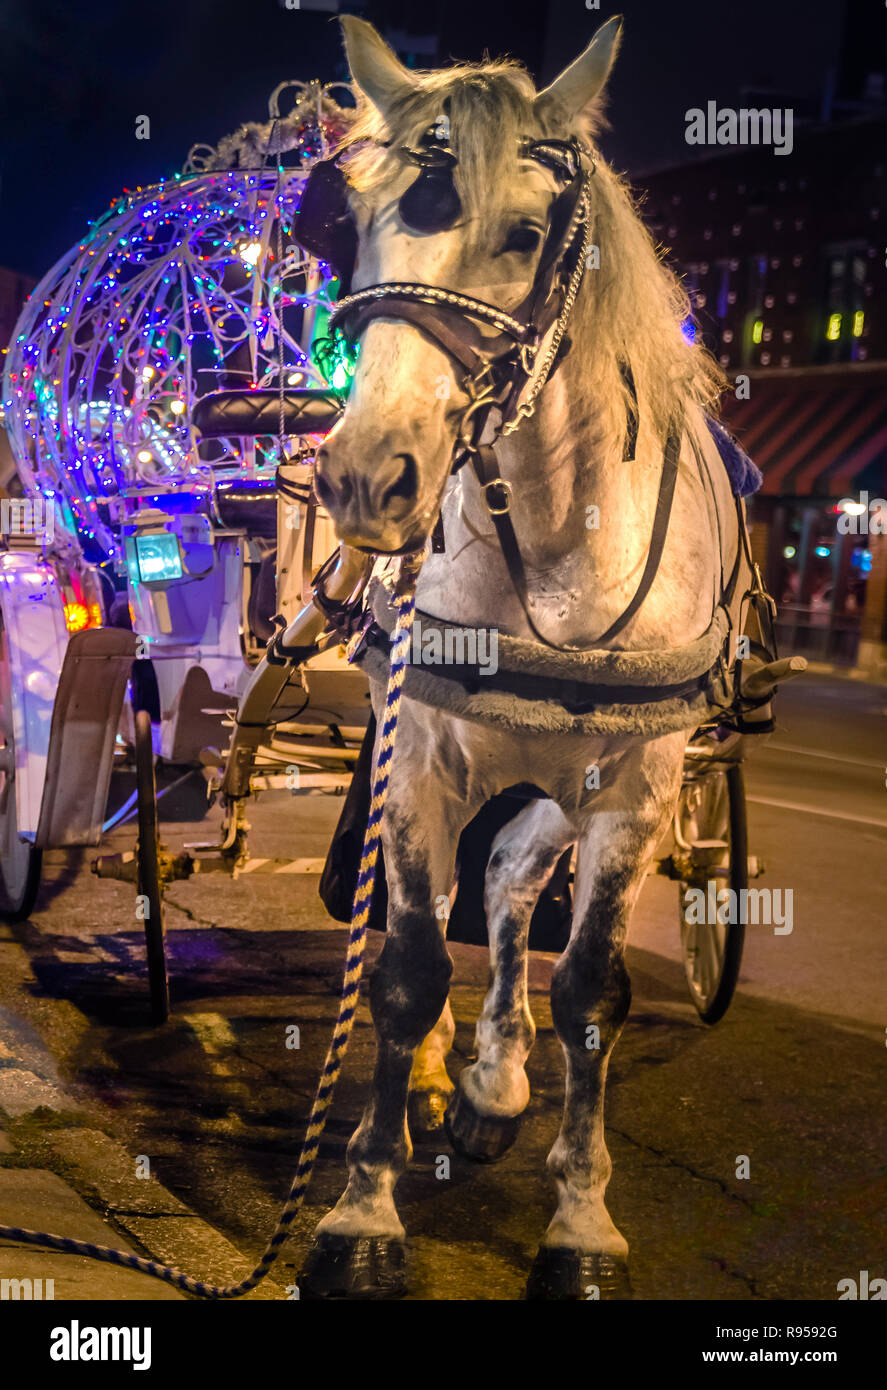 A carriage horse rests while waiting for the next customer on Beale Street, Sept. 5, 2015, in Memphis, Tennessee. Stock Photo